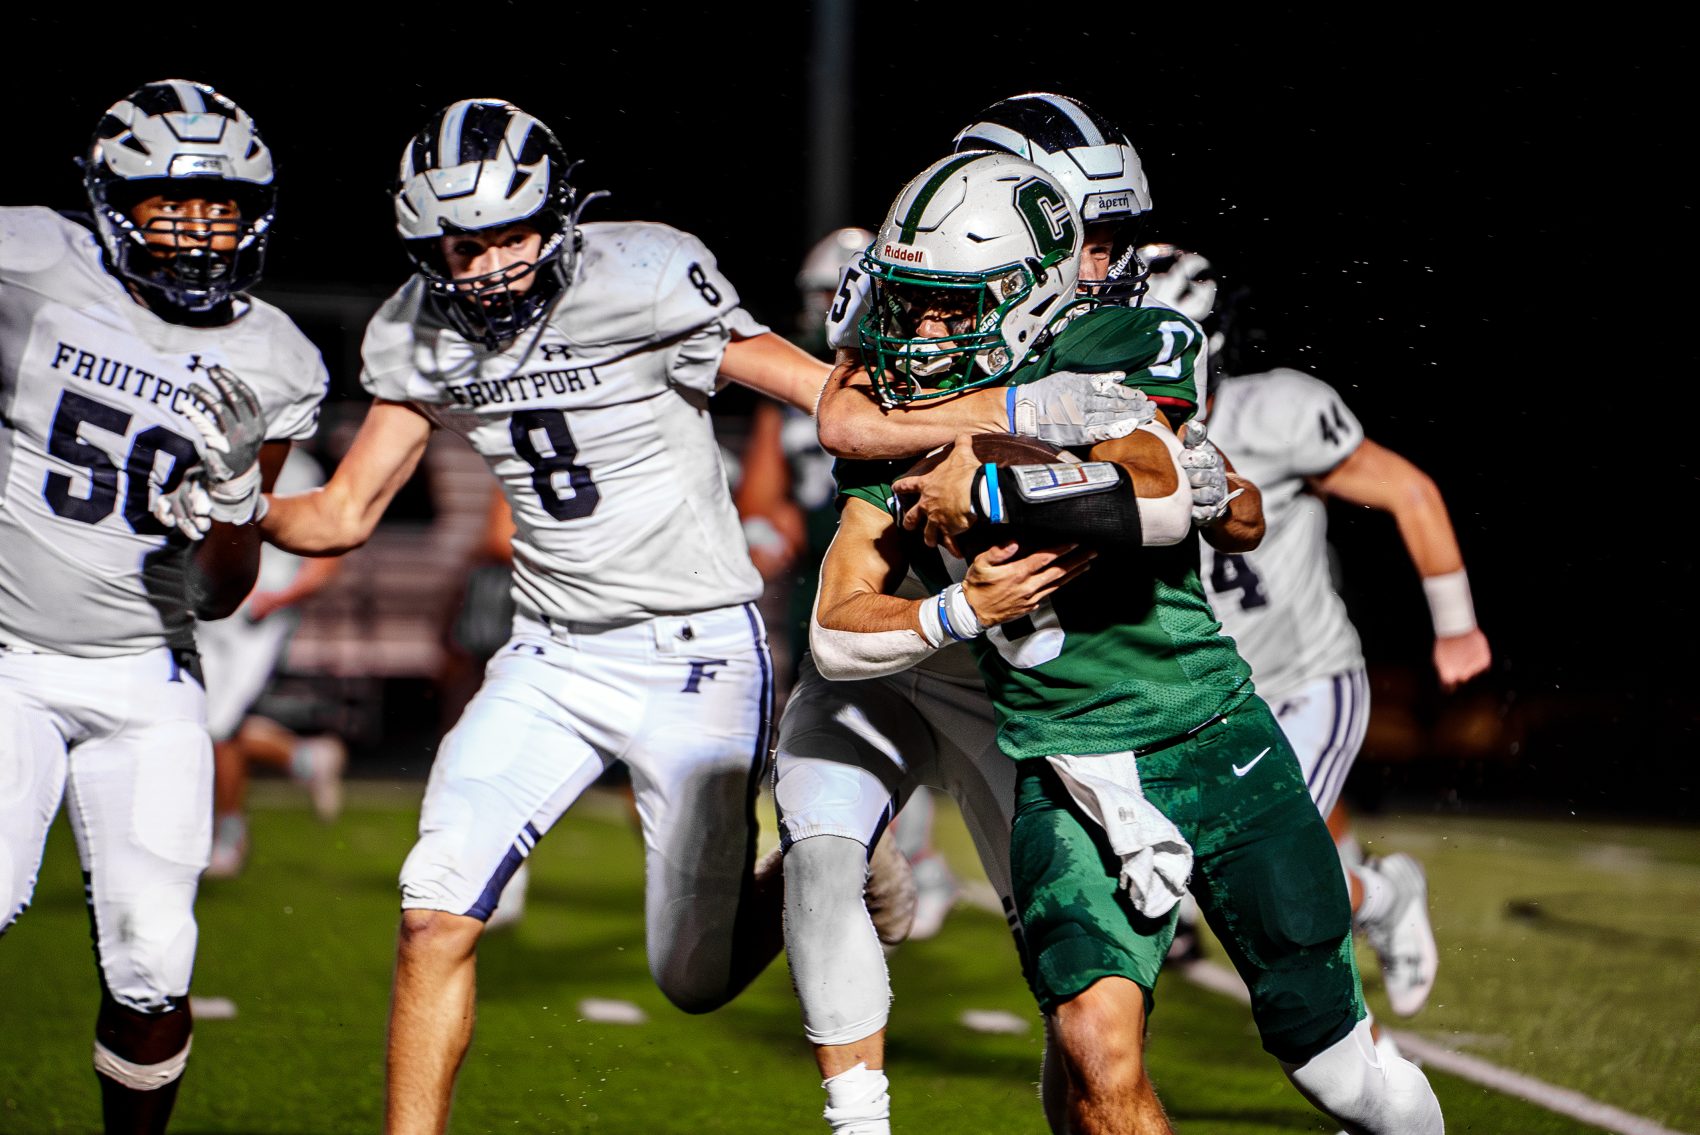 Fruitport remains winless after trip to Coopersville